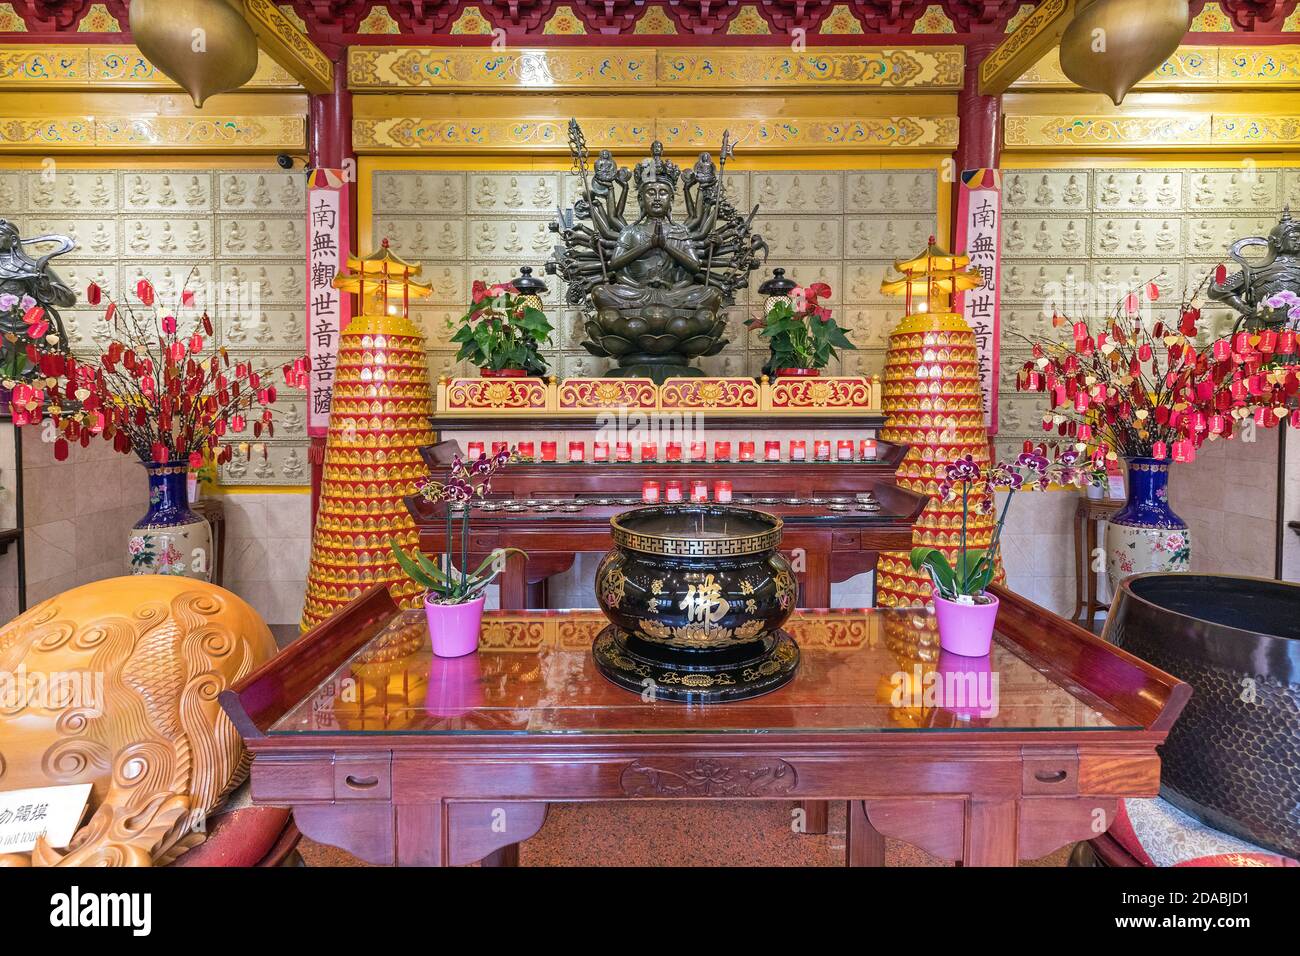 Amsterdam, Netherlands - May 18, 2018: Fo Guang Shan He Hua Buddhist Temple Interior in Amsterdam, Holland. Stock Photo